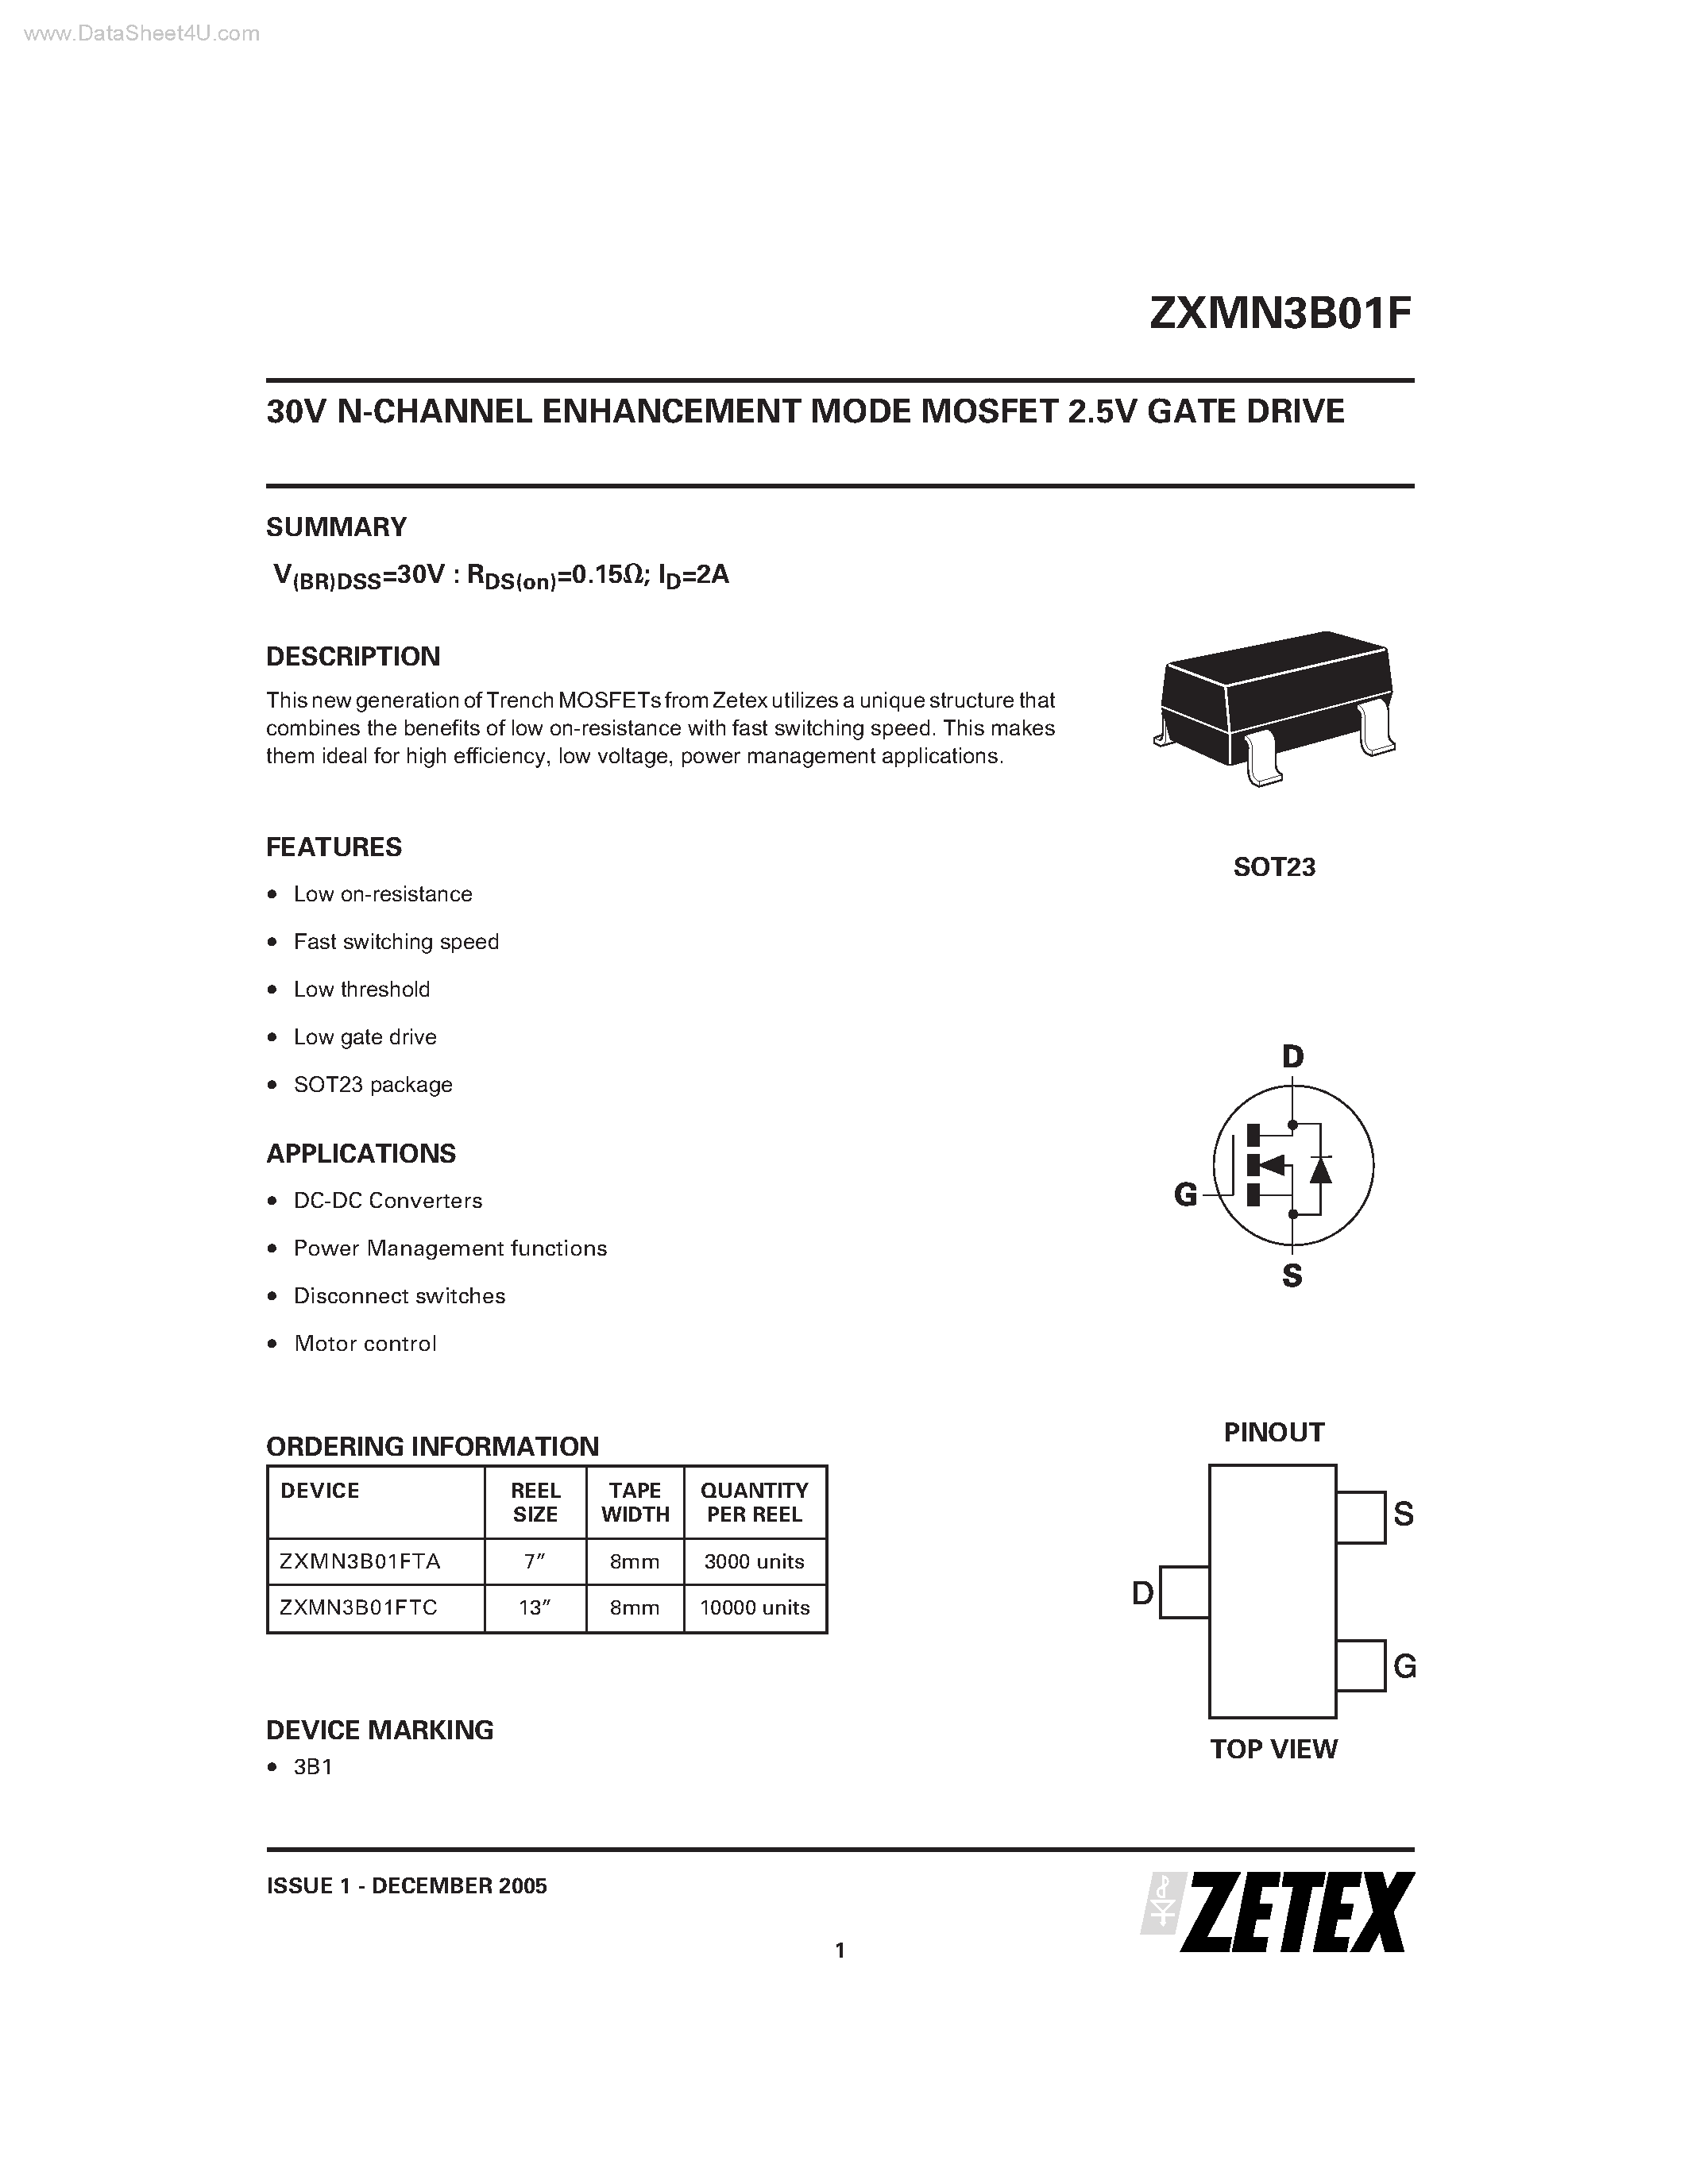 Datasheet ZXMN3B01F - N-CHANNEL ENHANCEMENT MODE MOSFET 2.5V GATE DRIVE page 1